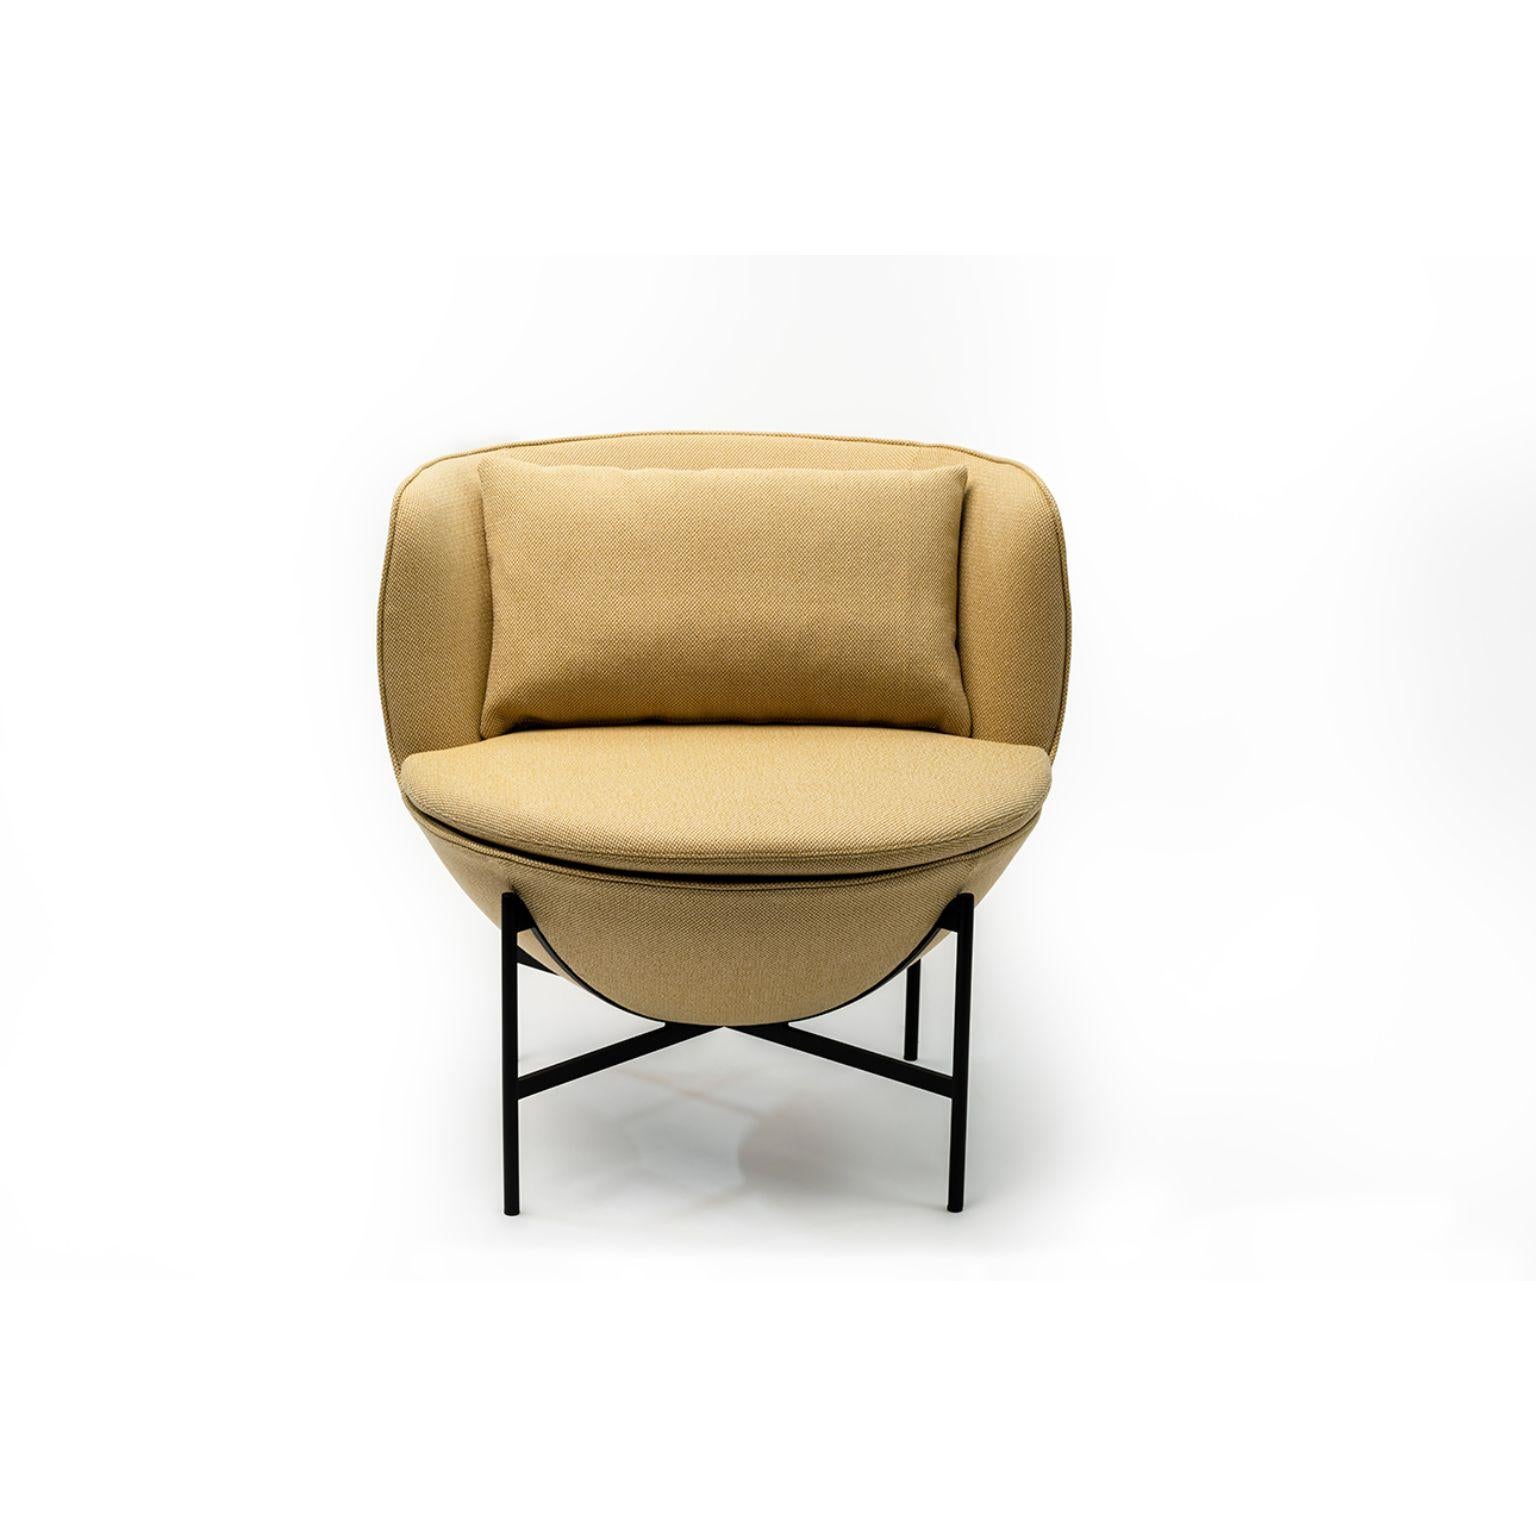 Calice armchair four-leg base by Patrick Norguet
Materials: Upholstery: Fabric also avaible in leather
Structure: Black powder-coated metal or Matte champagne and black chrome 
Dimensions: W 72.8 x D70.7 x H 71.6 cm
 HS 43.7 cm

The Calice armchair